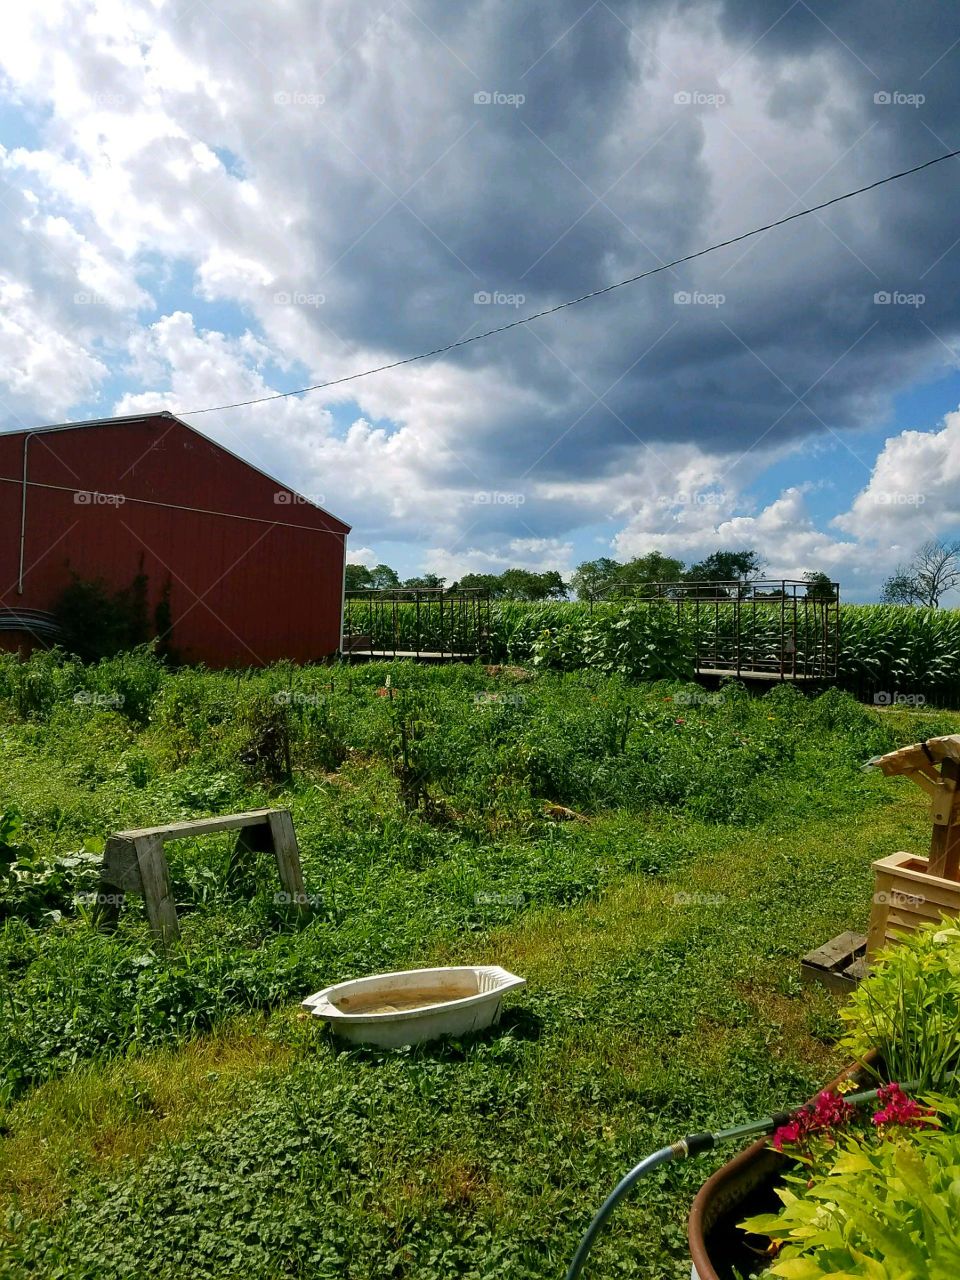 Vegetable garden, red barn, roadside stand business, sky & clouds.